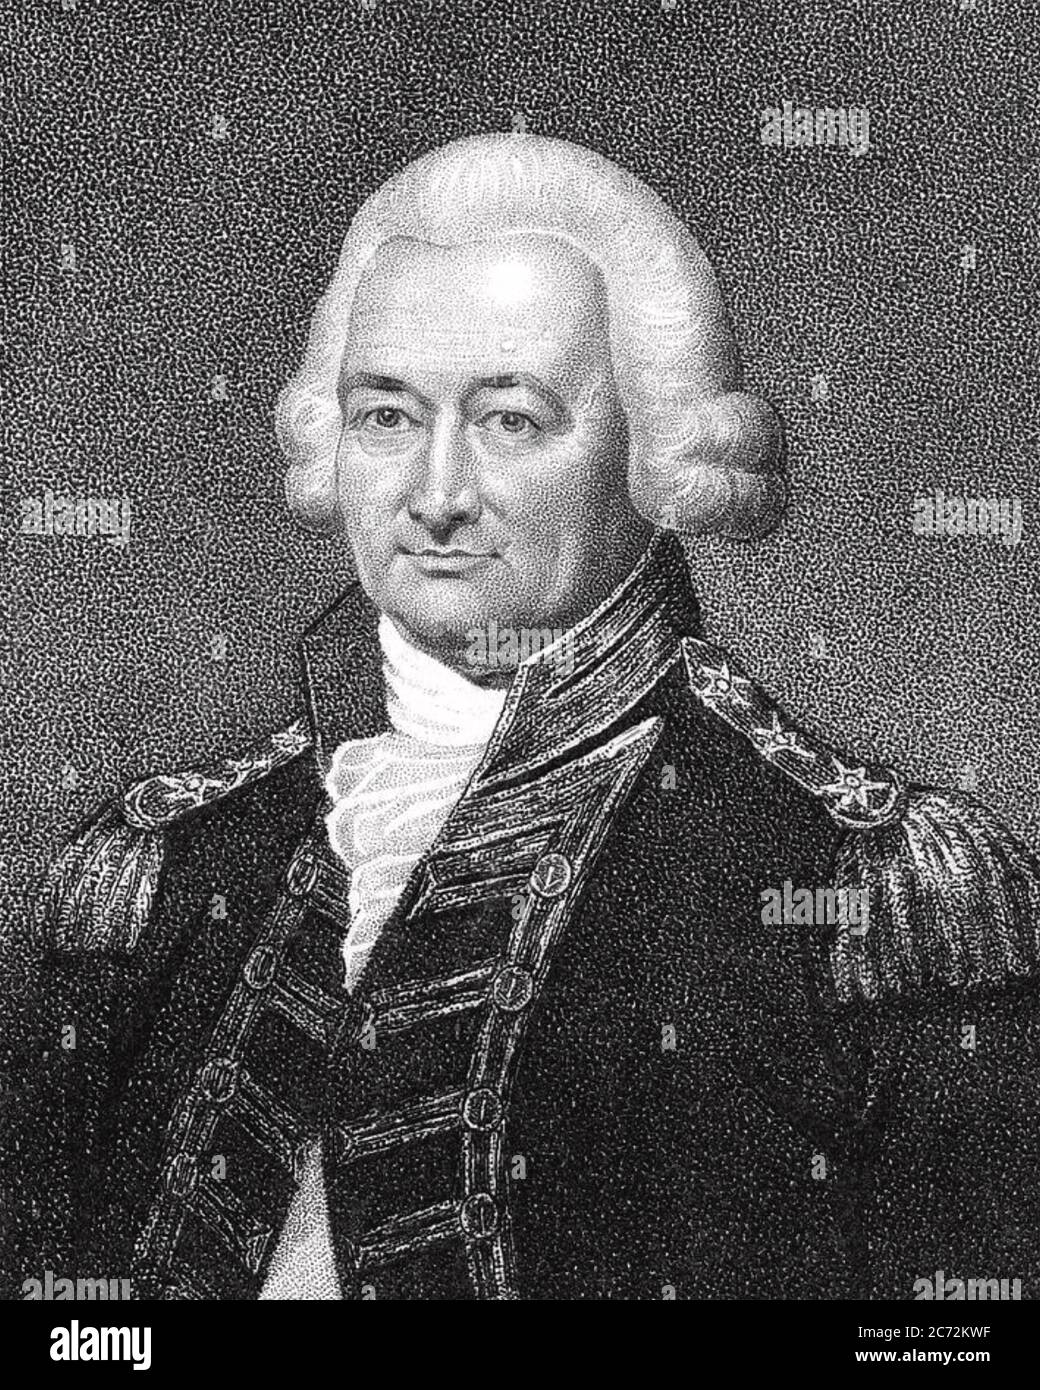 PETER PARKER, 1st Baronet (1721-1811) senior Royal Navy officer, about 1800 Stock Photo